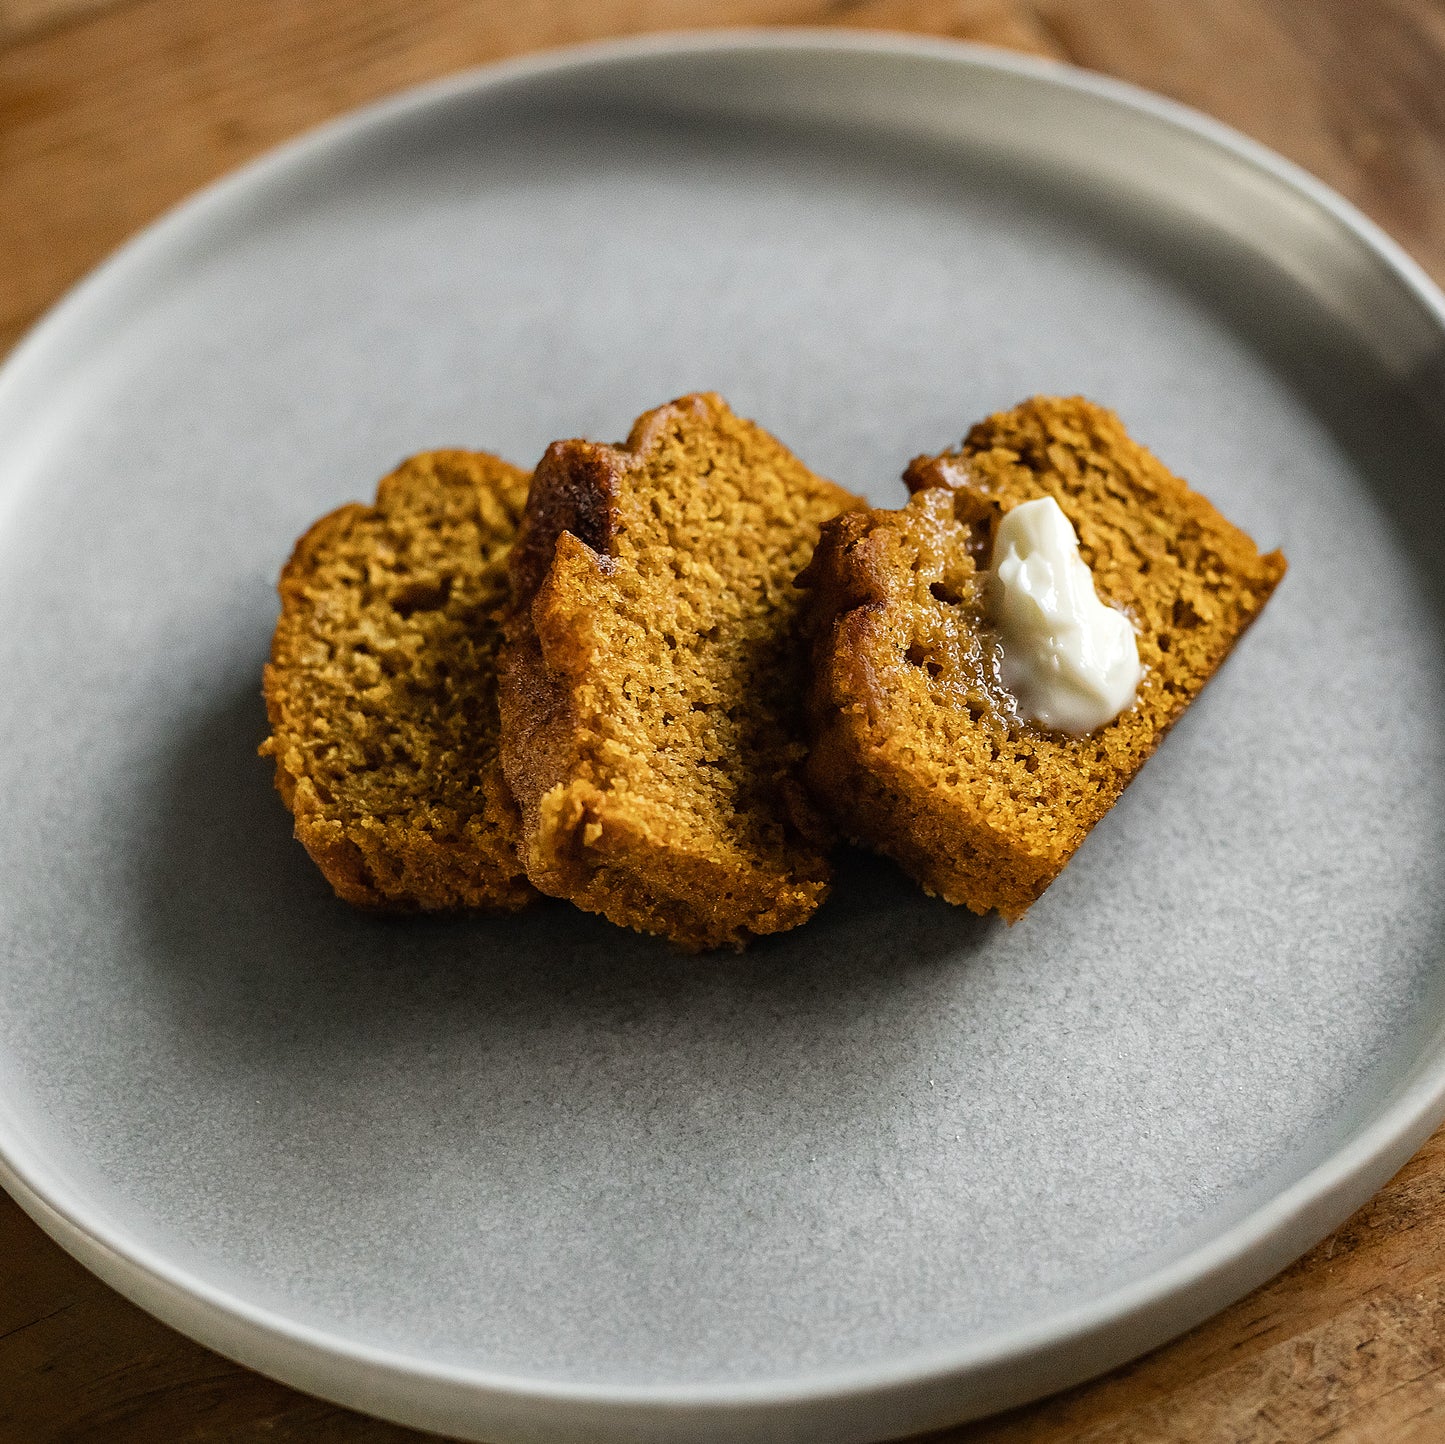 Delicious, moist pumpkin bread - get it delivered with your meal delivery